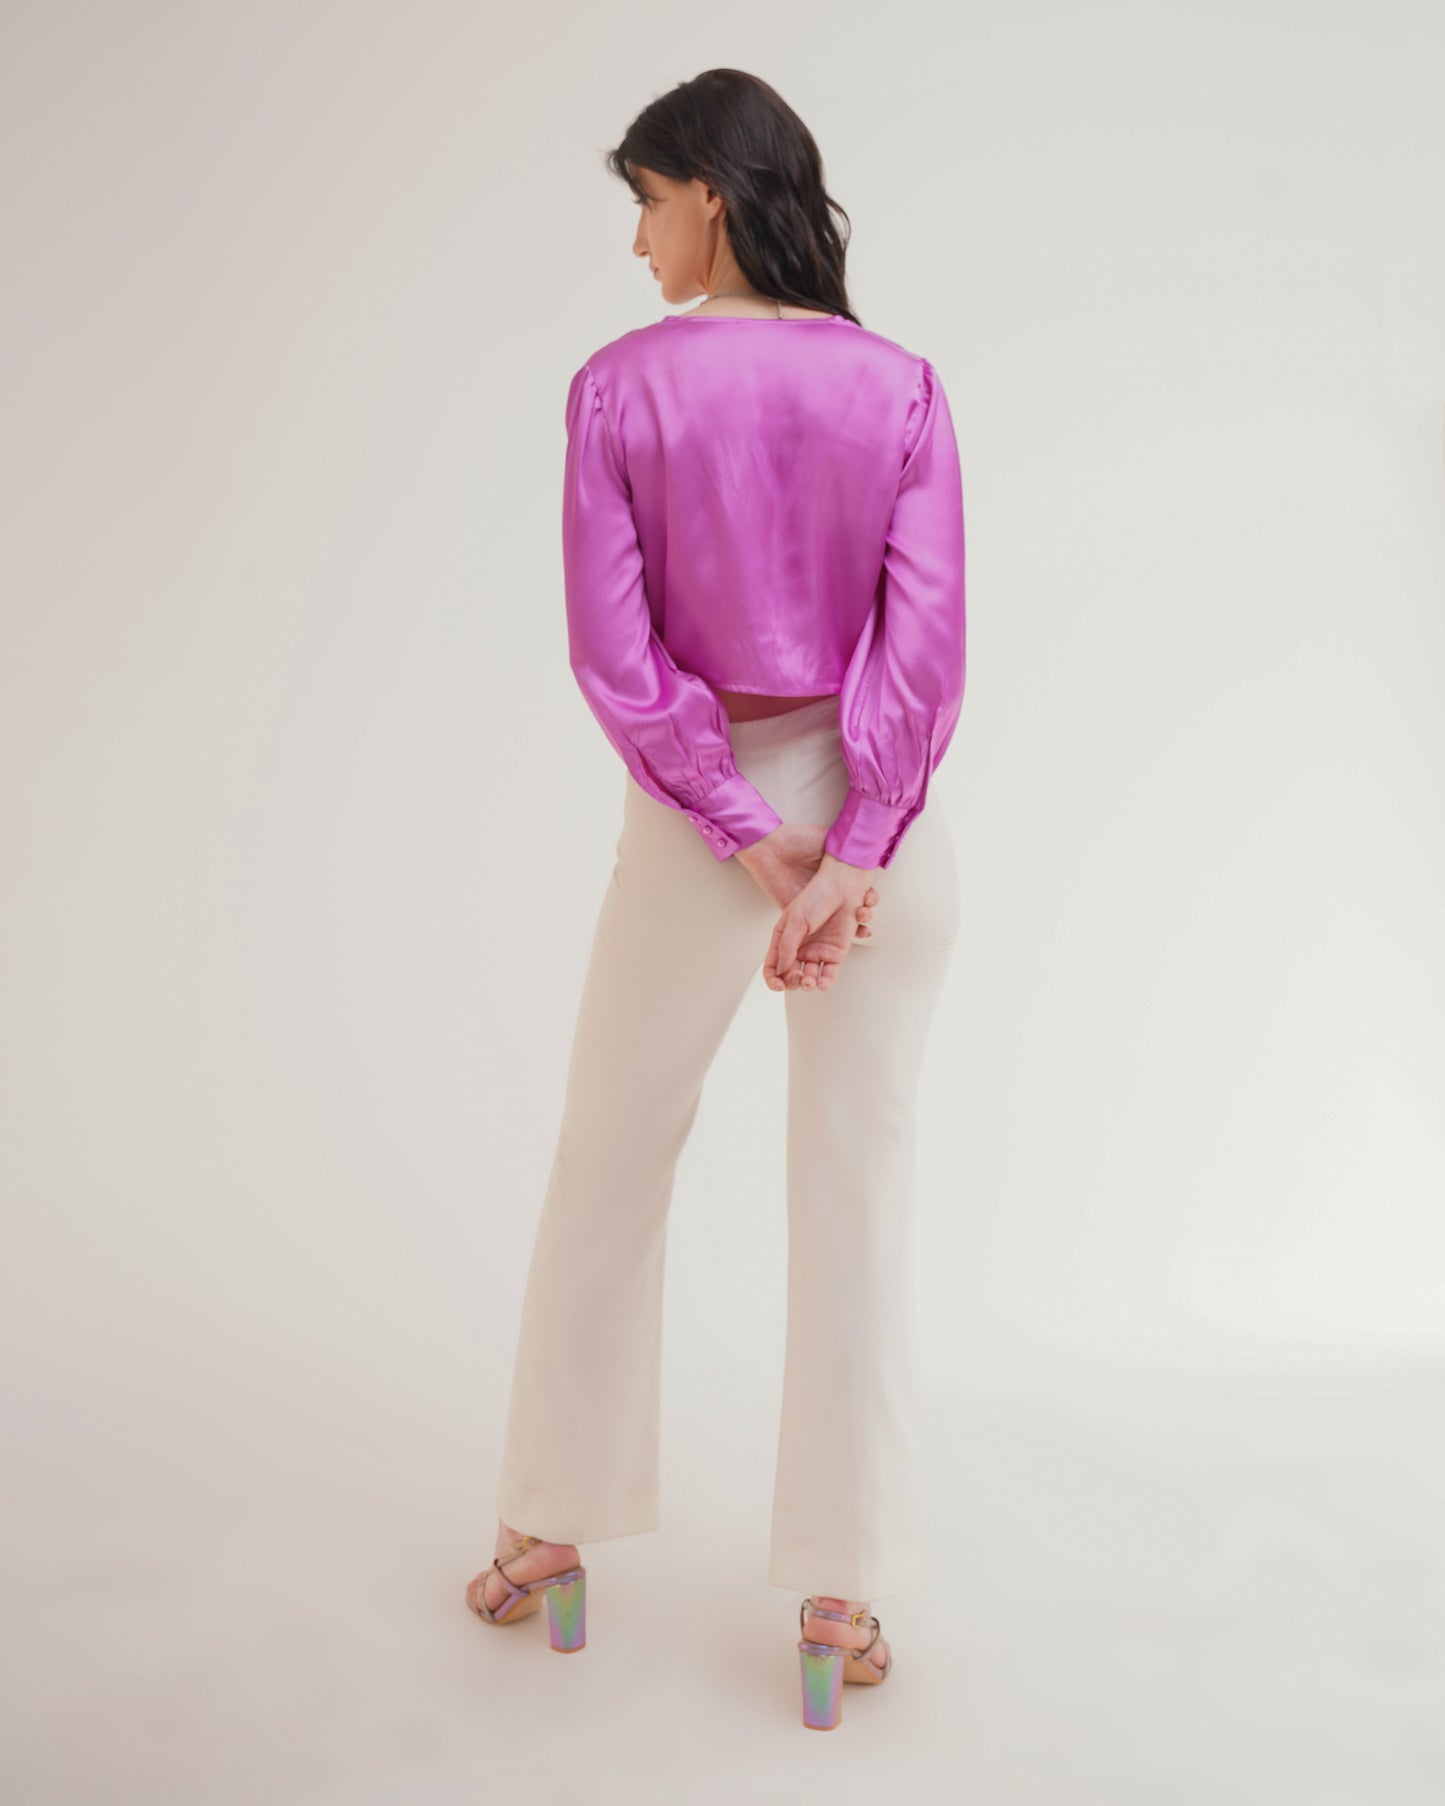 PLUNGE NECKLINE TOP,bishop sleeves, blouse, casual, crop, glam, long sleeves, plunge neckline, purple, relaxed fit, satin, solid, summer, tie knot, tops, topwear, vacation, woven,regular-fit-front-knot-purple-top,Neck - Plunging necklineSleeve - Bishop sleevesFit - Regular fitPrint/Pattern - SolidColor - PurpleMaterial - SatinDetail - Front knotted